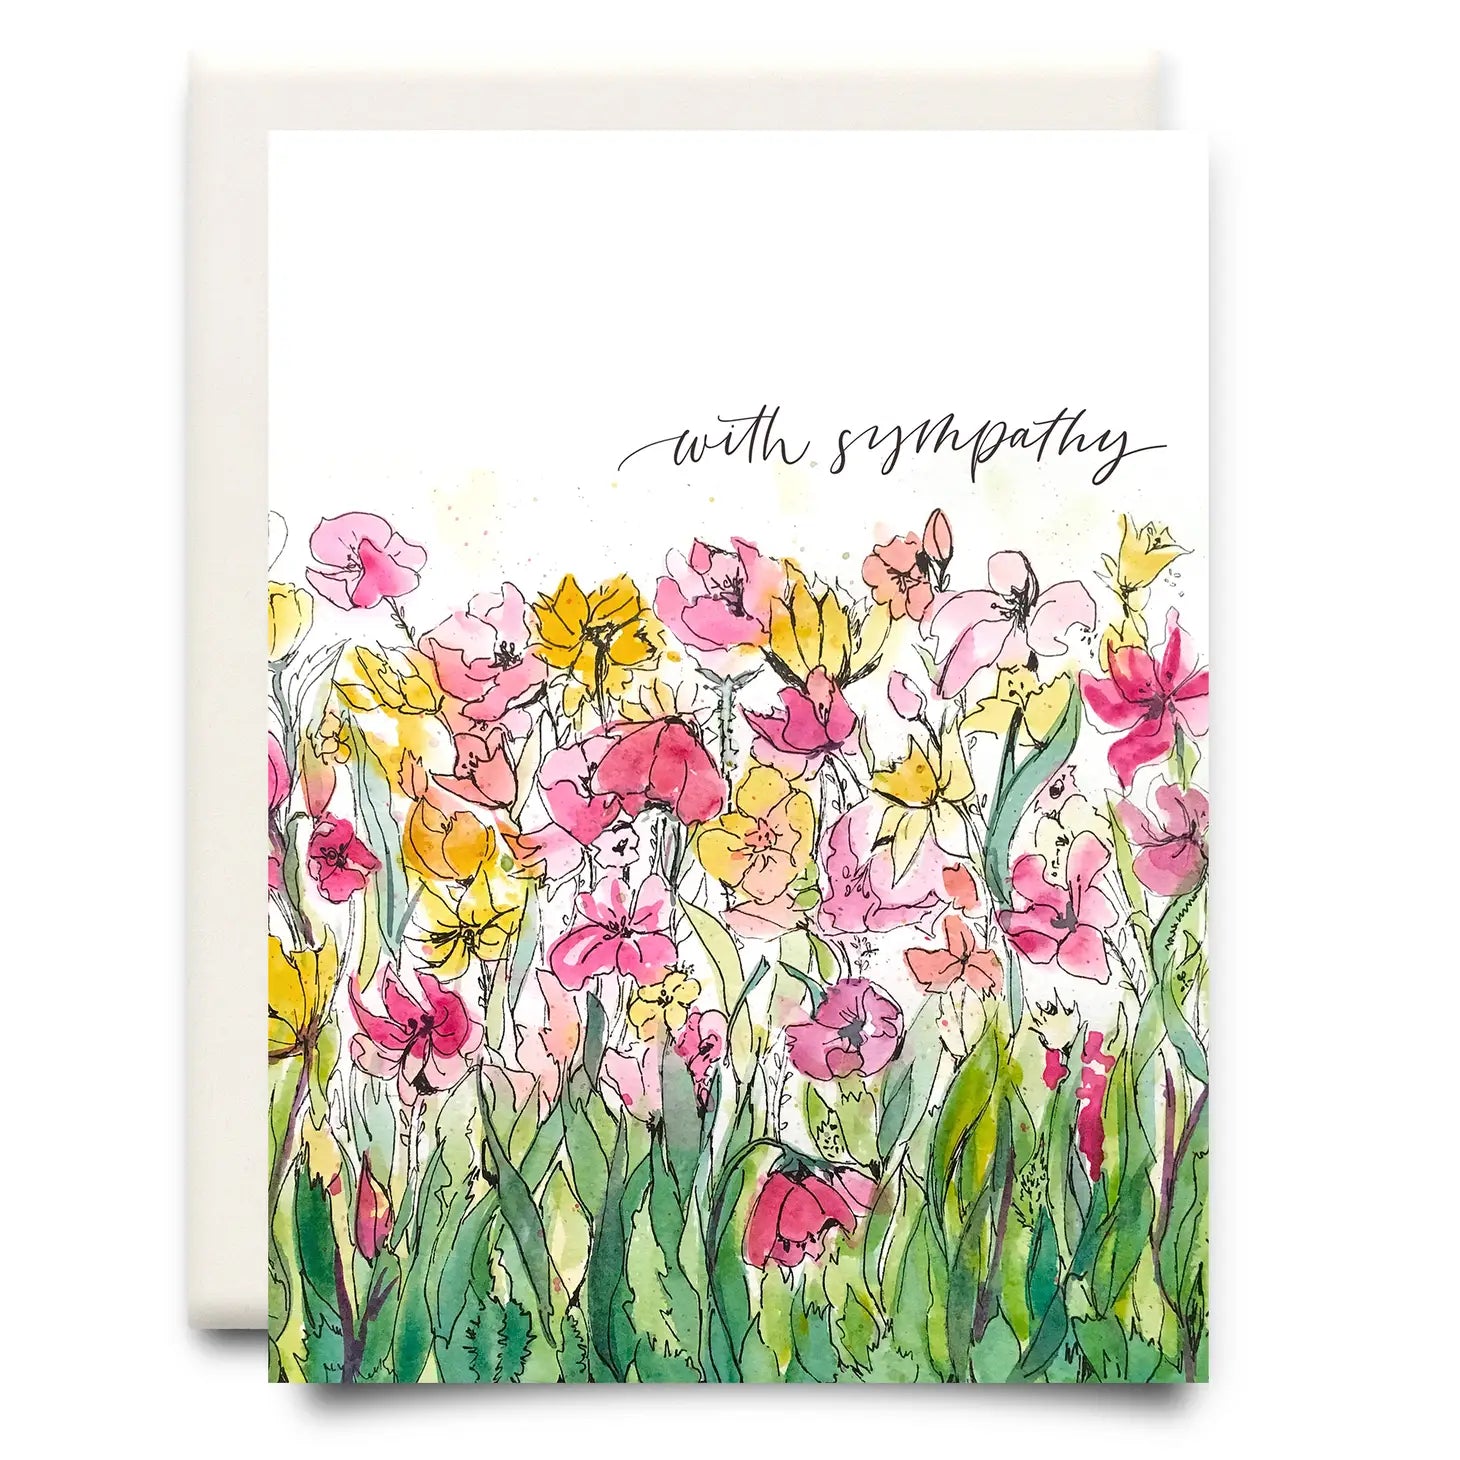 Inkwell Cards “With Sympathy” Card